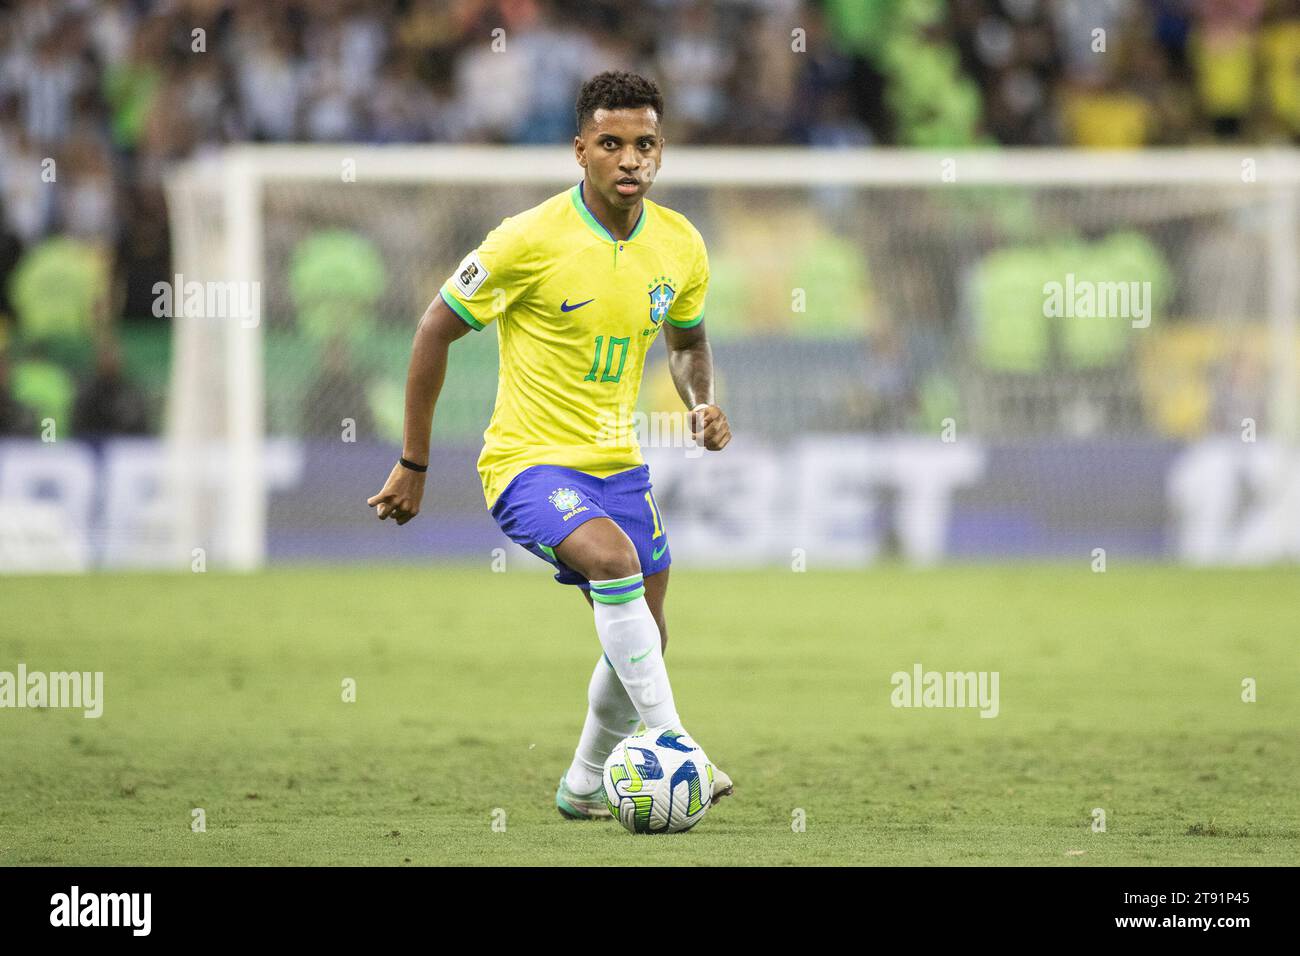 Rio De Janeiro, Brazil. 21st Nov, 2023. RIO DE JANEIRO, BRAZIL - NOVEMBER 21: Rodrygo of Brazil controls the ball during a match between Brazil and Argentina as part of 2026 FIFA World Cup South American Qualification at Maracana Stadium on November 21, 2023 in Rio de Janeiro, Brazil. (Photo by Wanderson Oliveira/PxImages/Sipa USA) Credit: Sipa USA/Alamy Live News Stock Photo